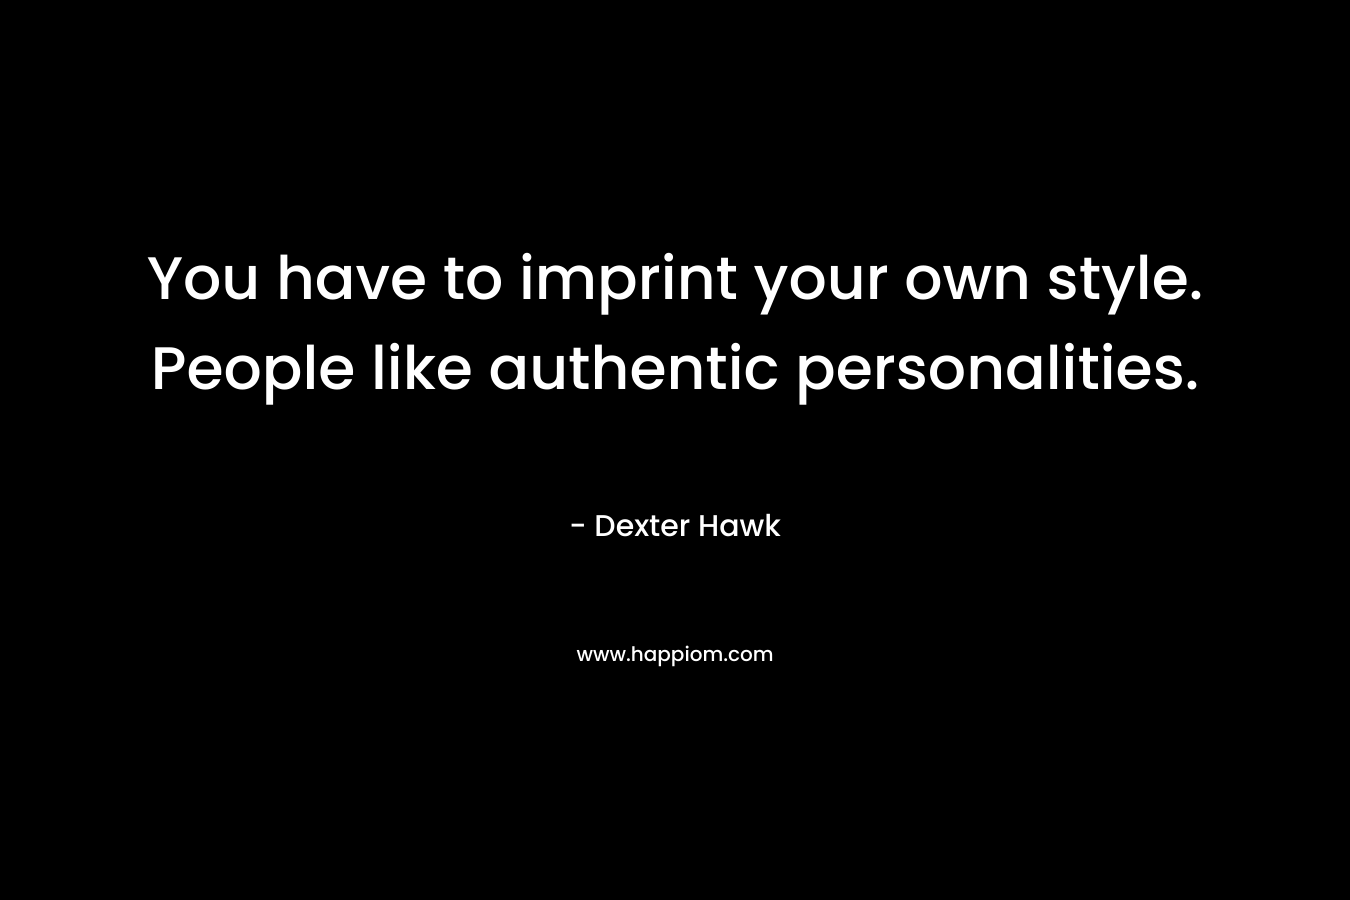 You have to imprint your own style. People like authentic personalities.